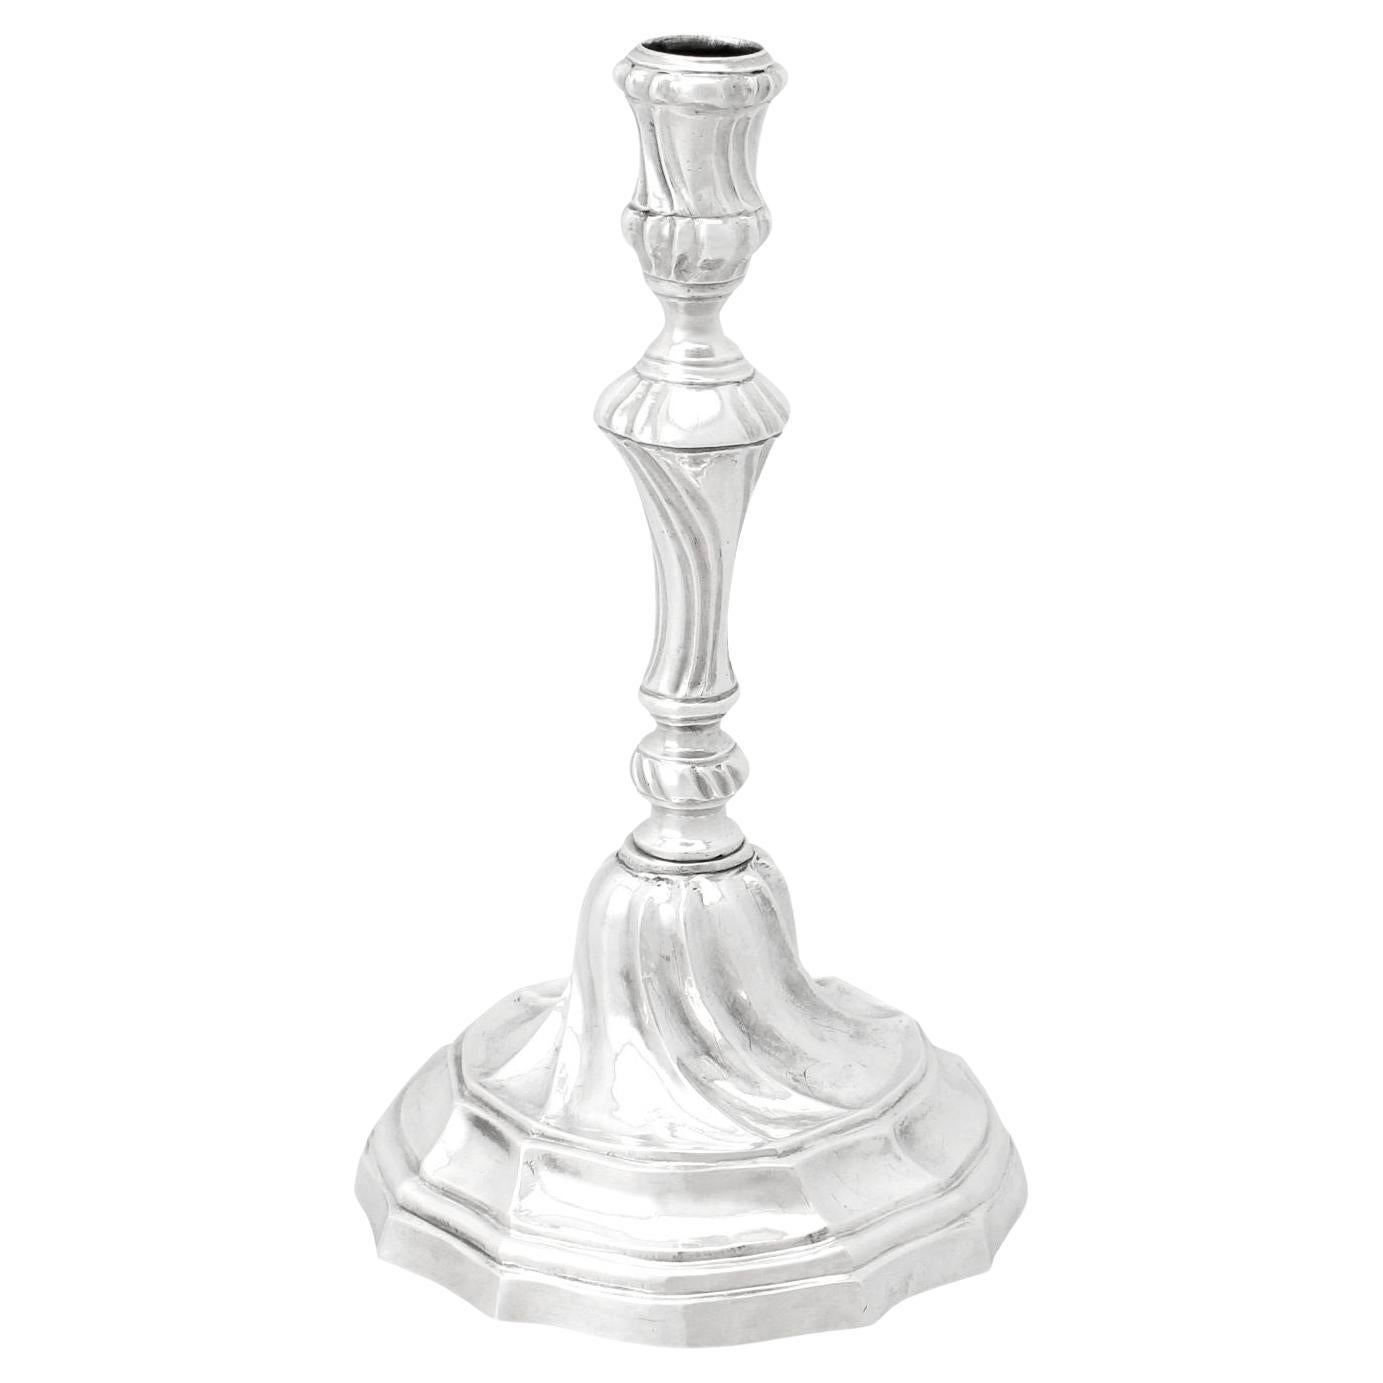 Antique Spanish Silver Candle Holder